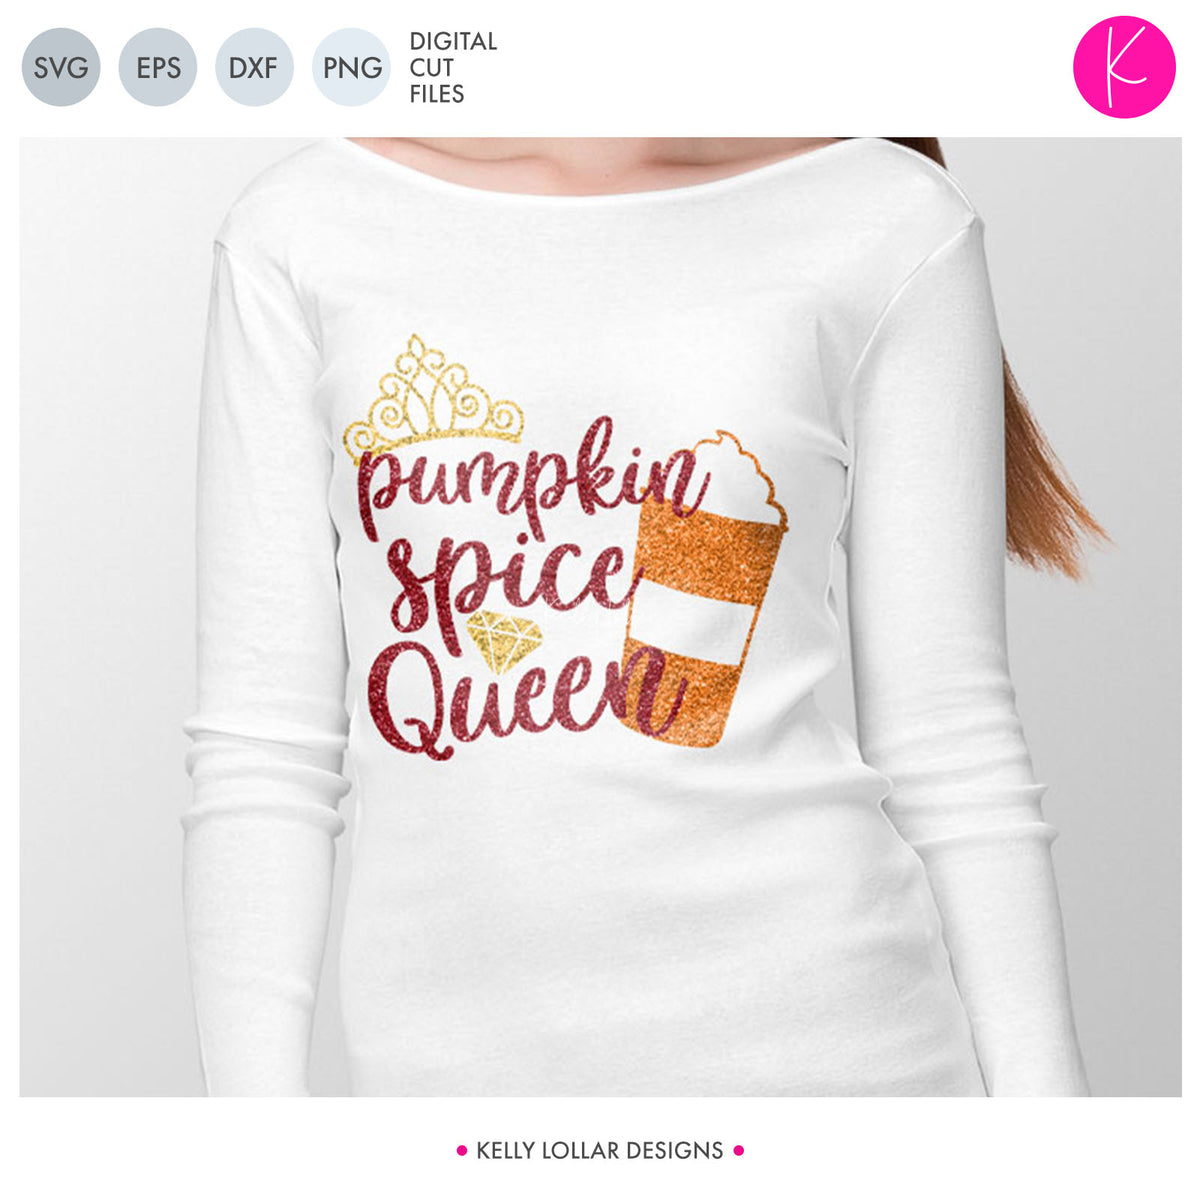 Pumpkin Spice Queen and Princess | SVG DXF EPS PNG Cut Files